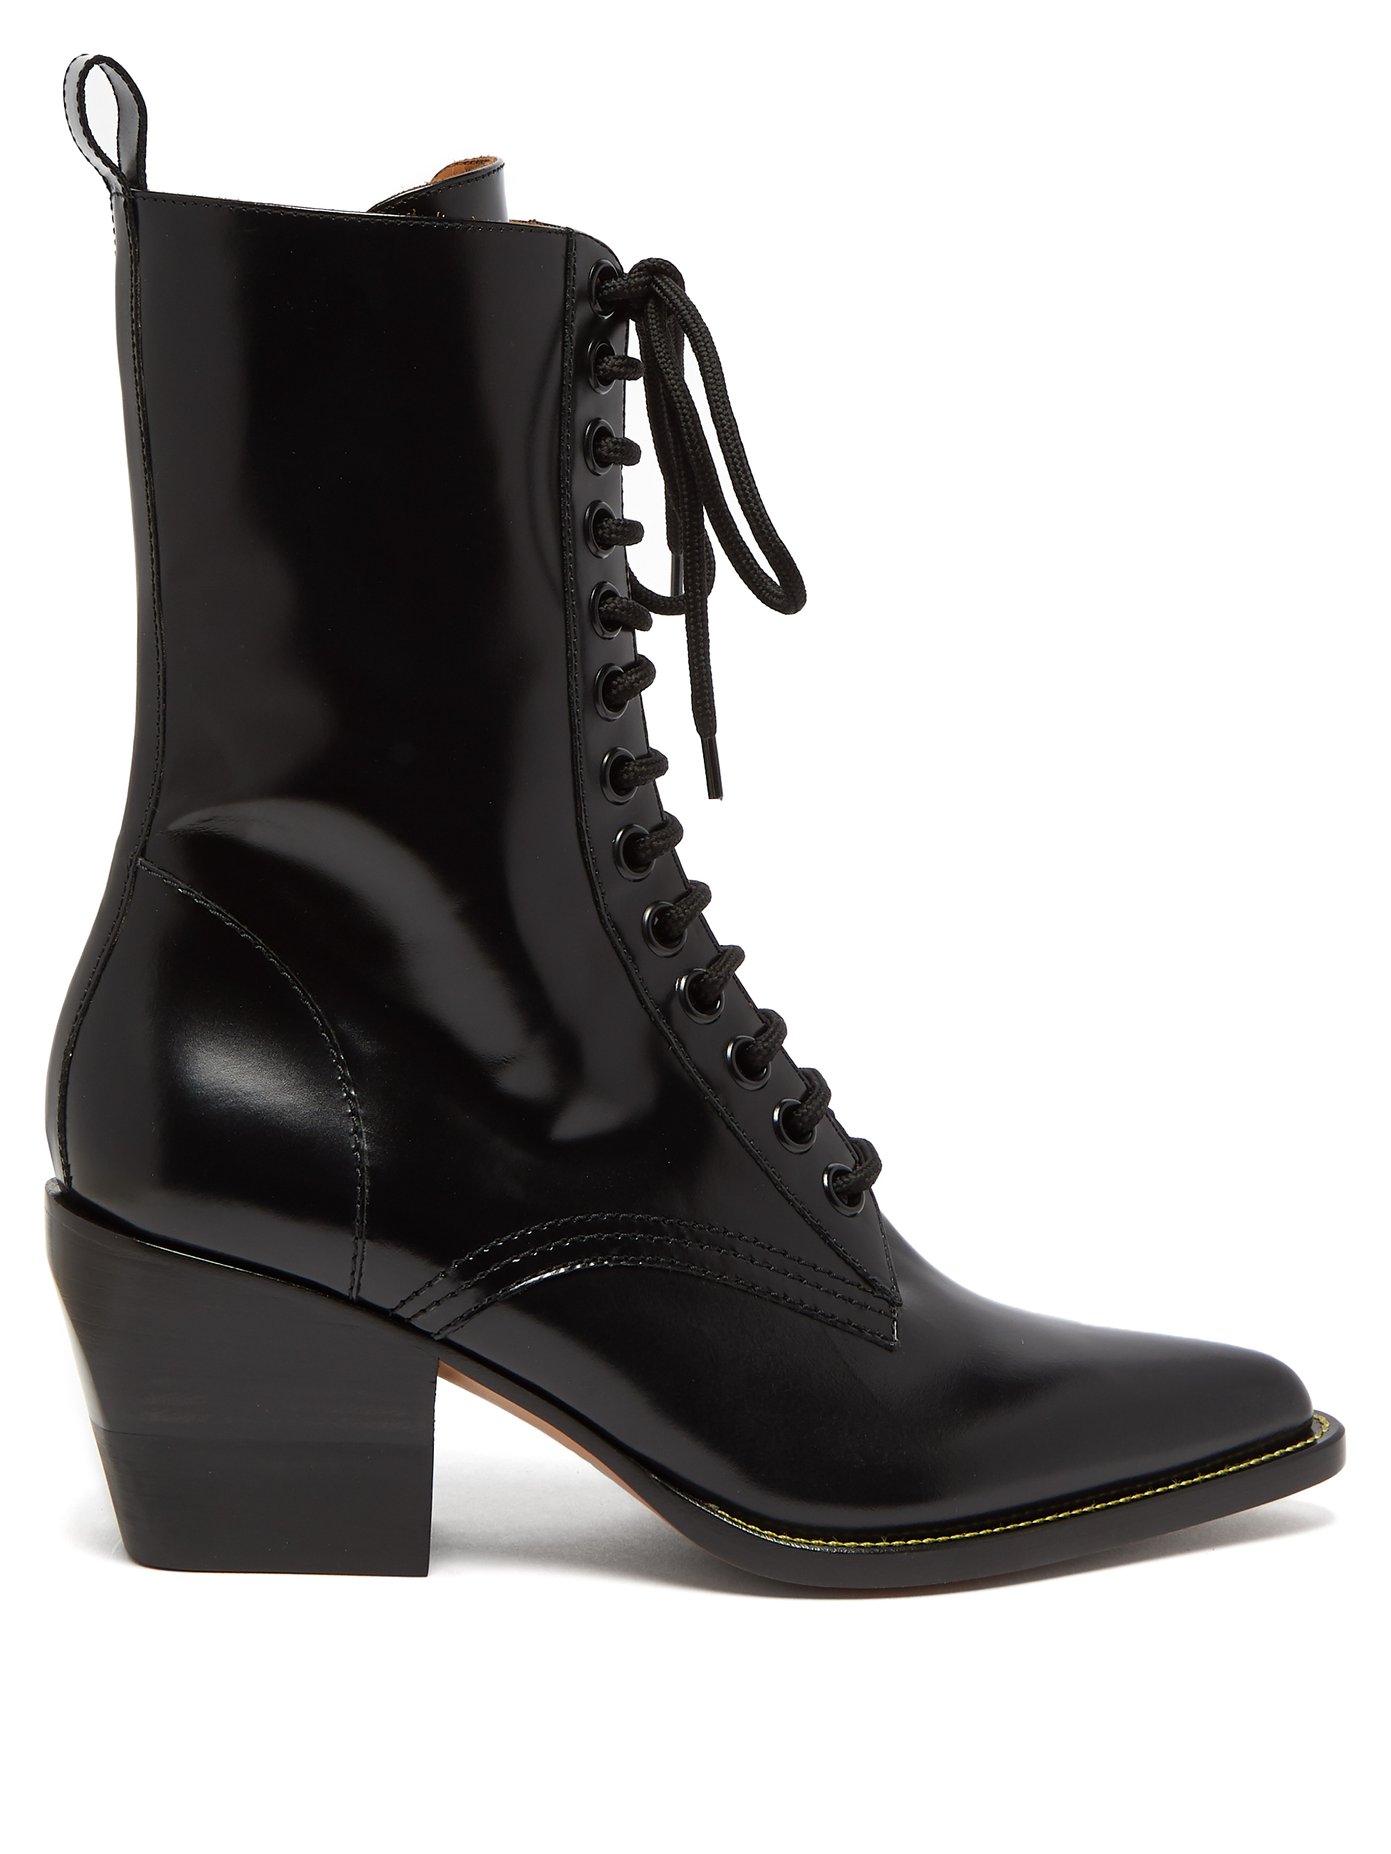 Point-toe lace-up leather boots | Chloé 